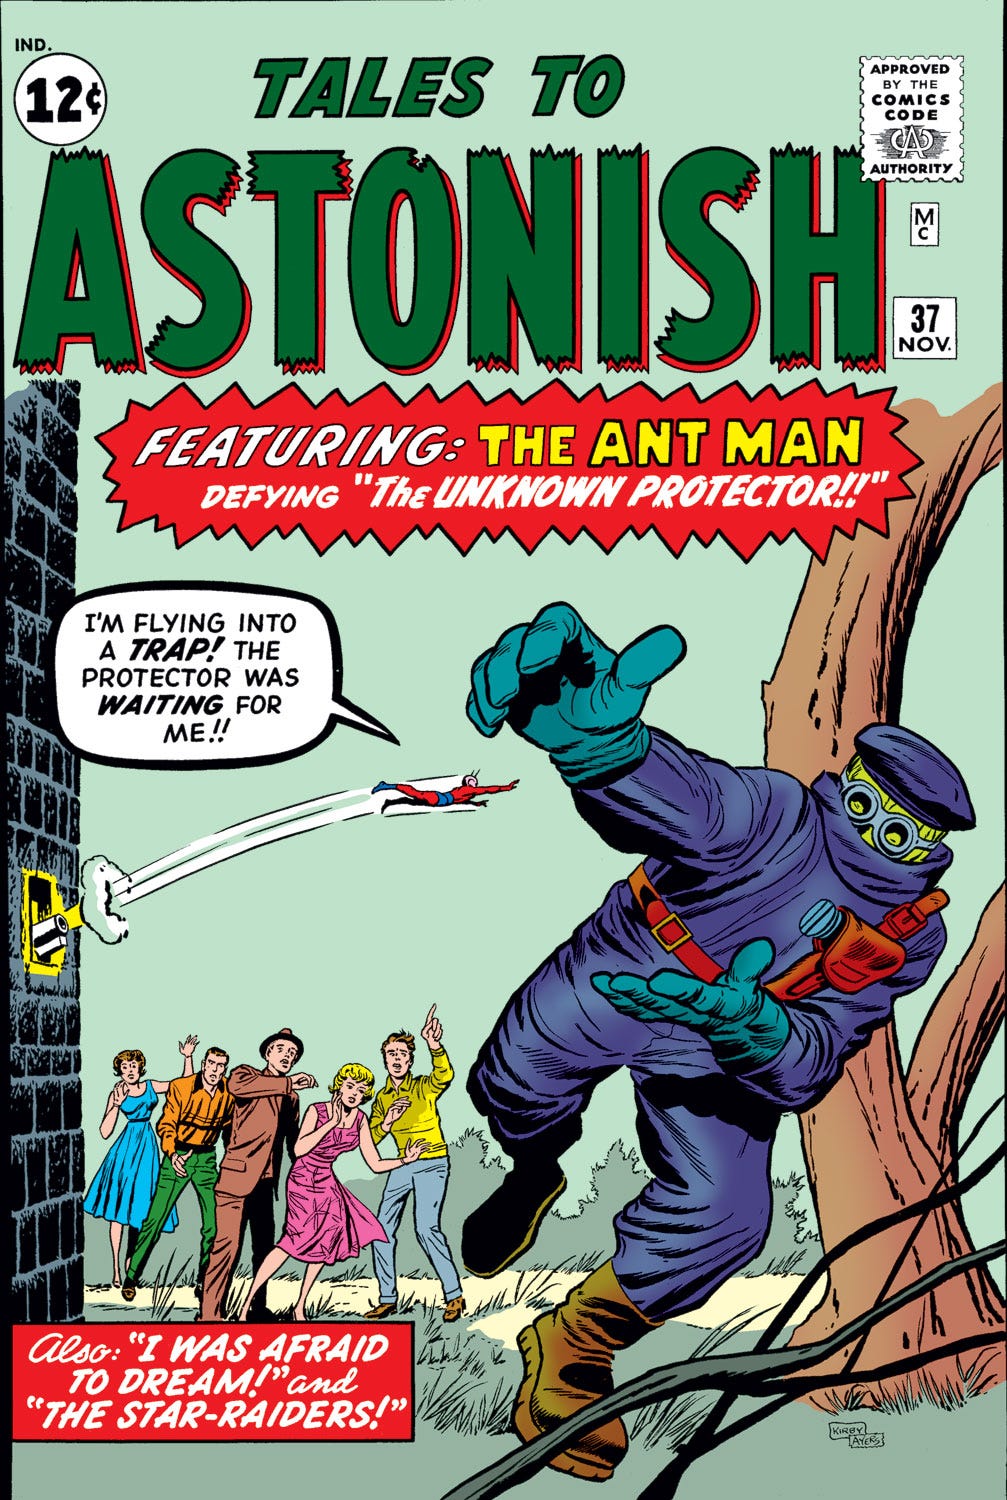 Tales to Astonish (1959) #37 | Comic Issues | Marvel